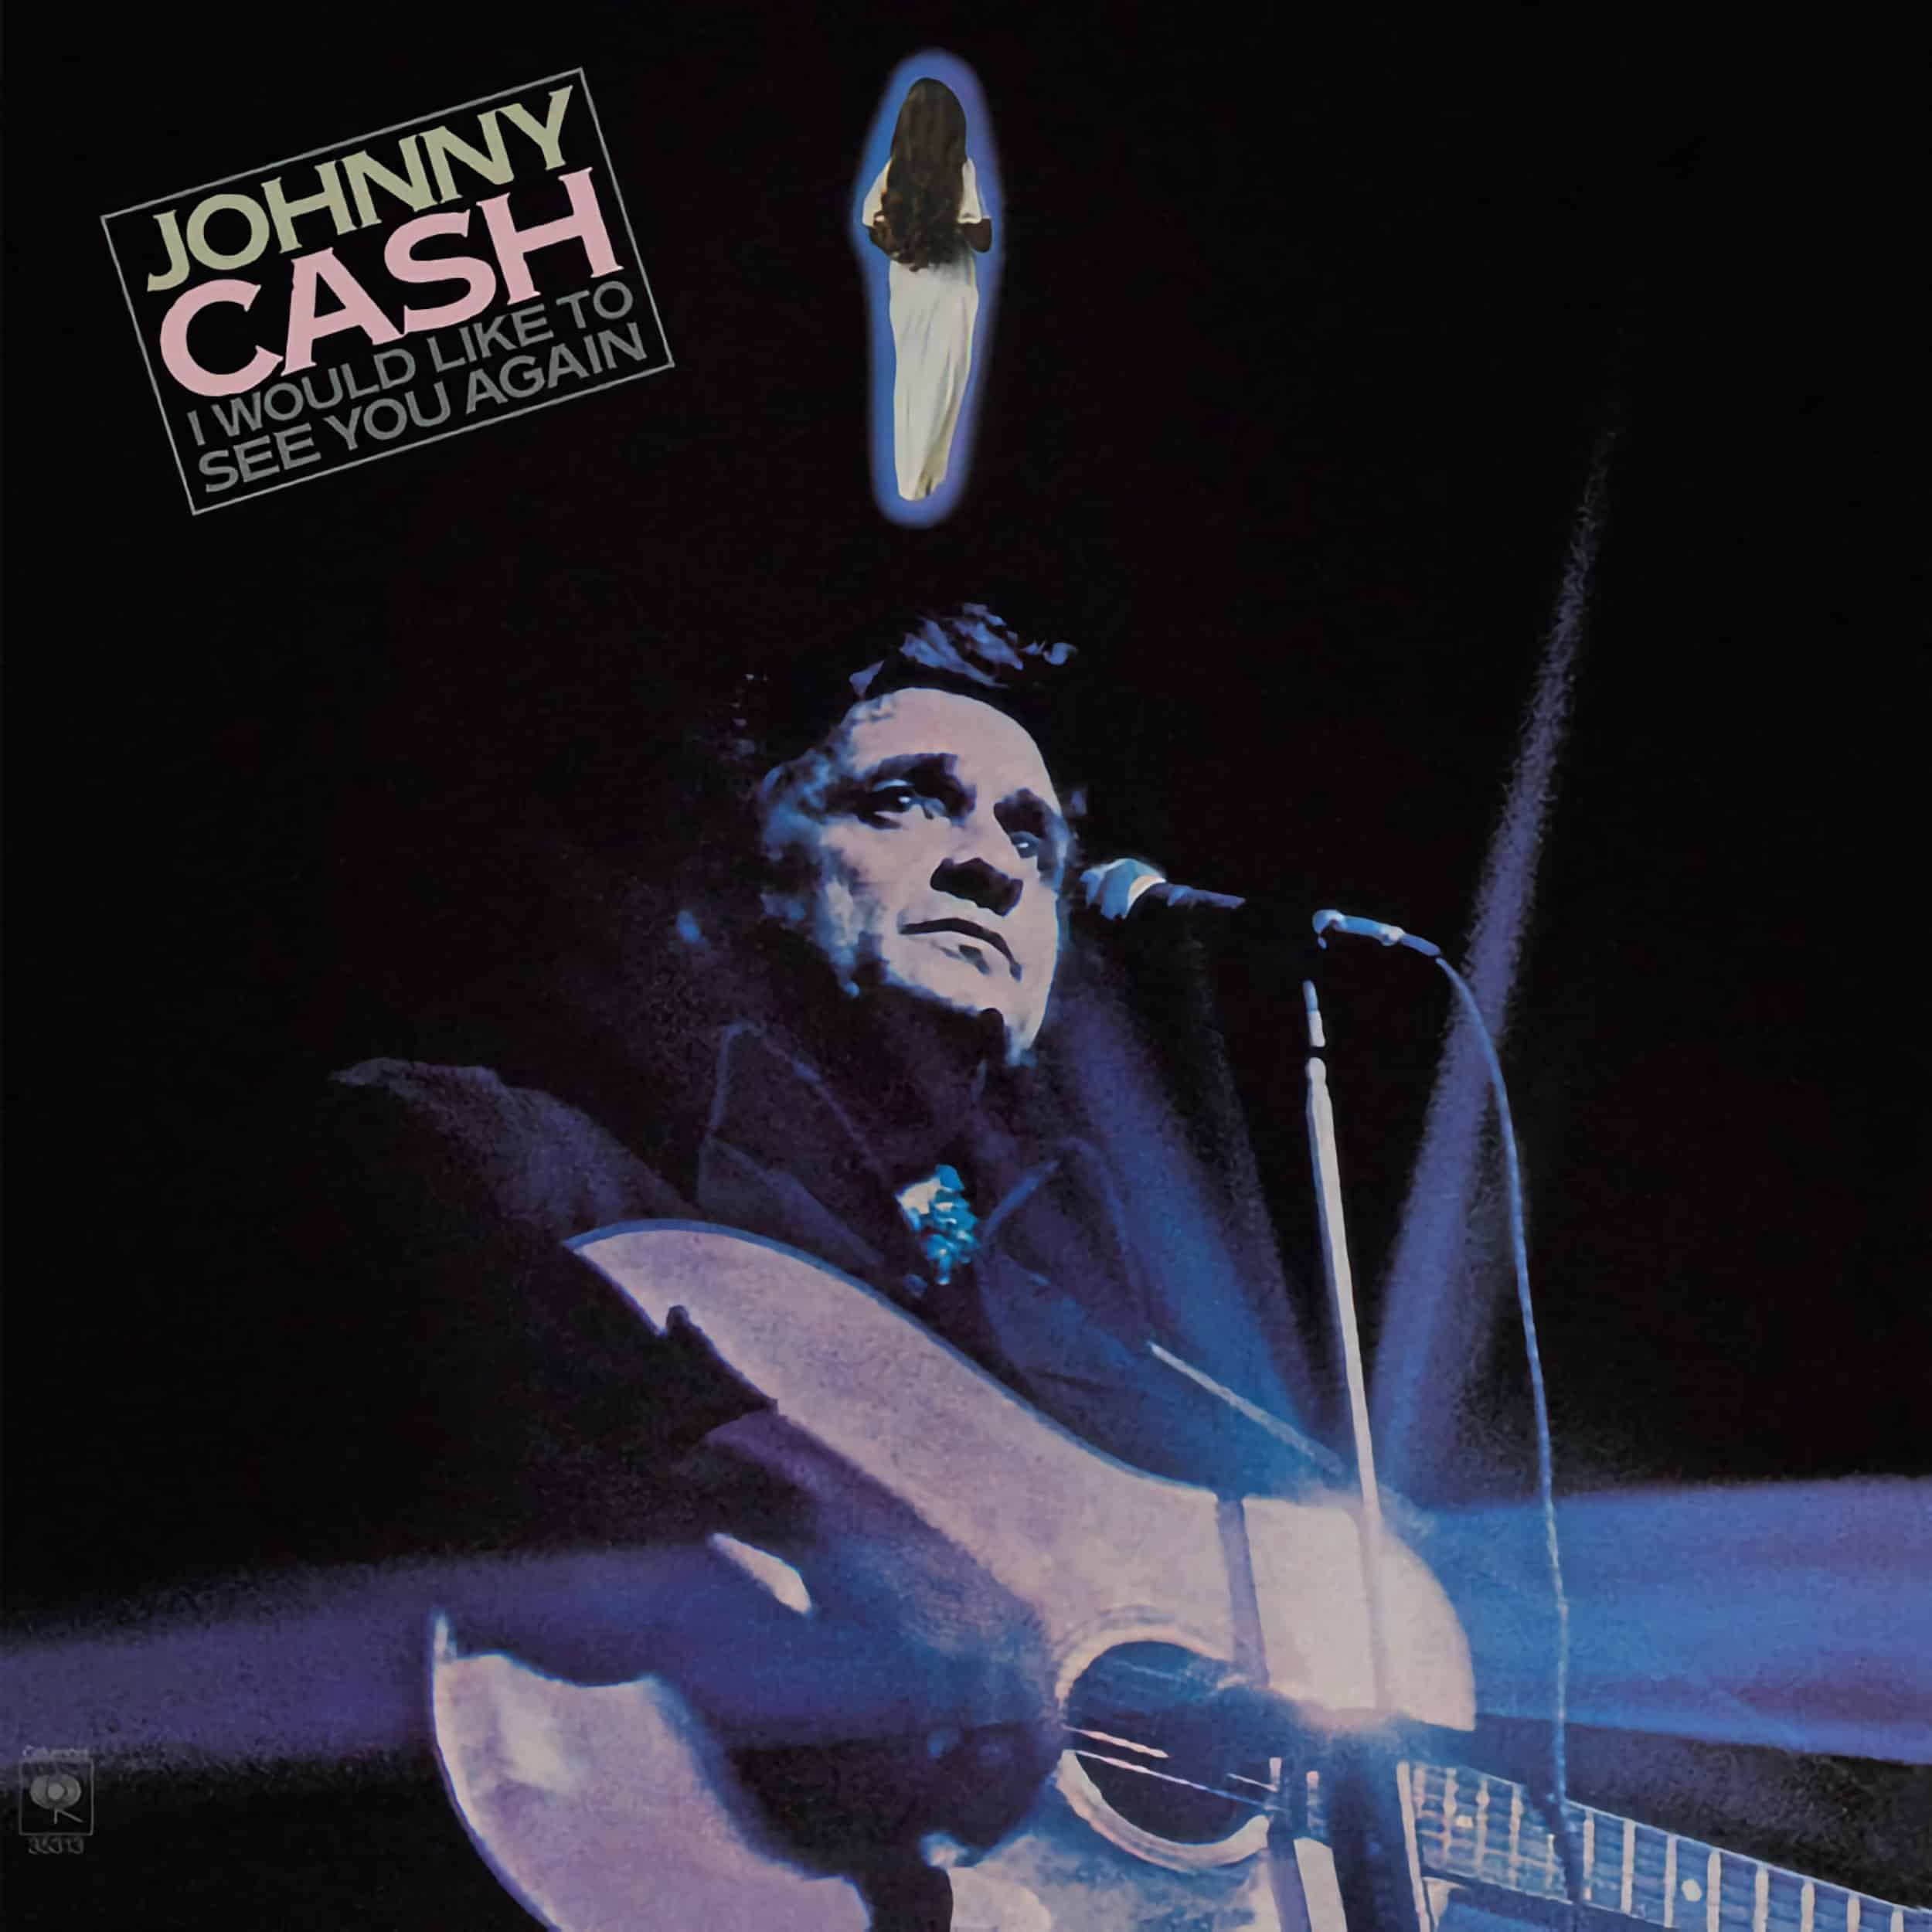 Johnny Cash – I Would Like To See You Again